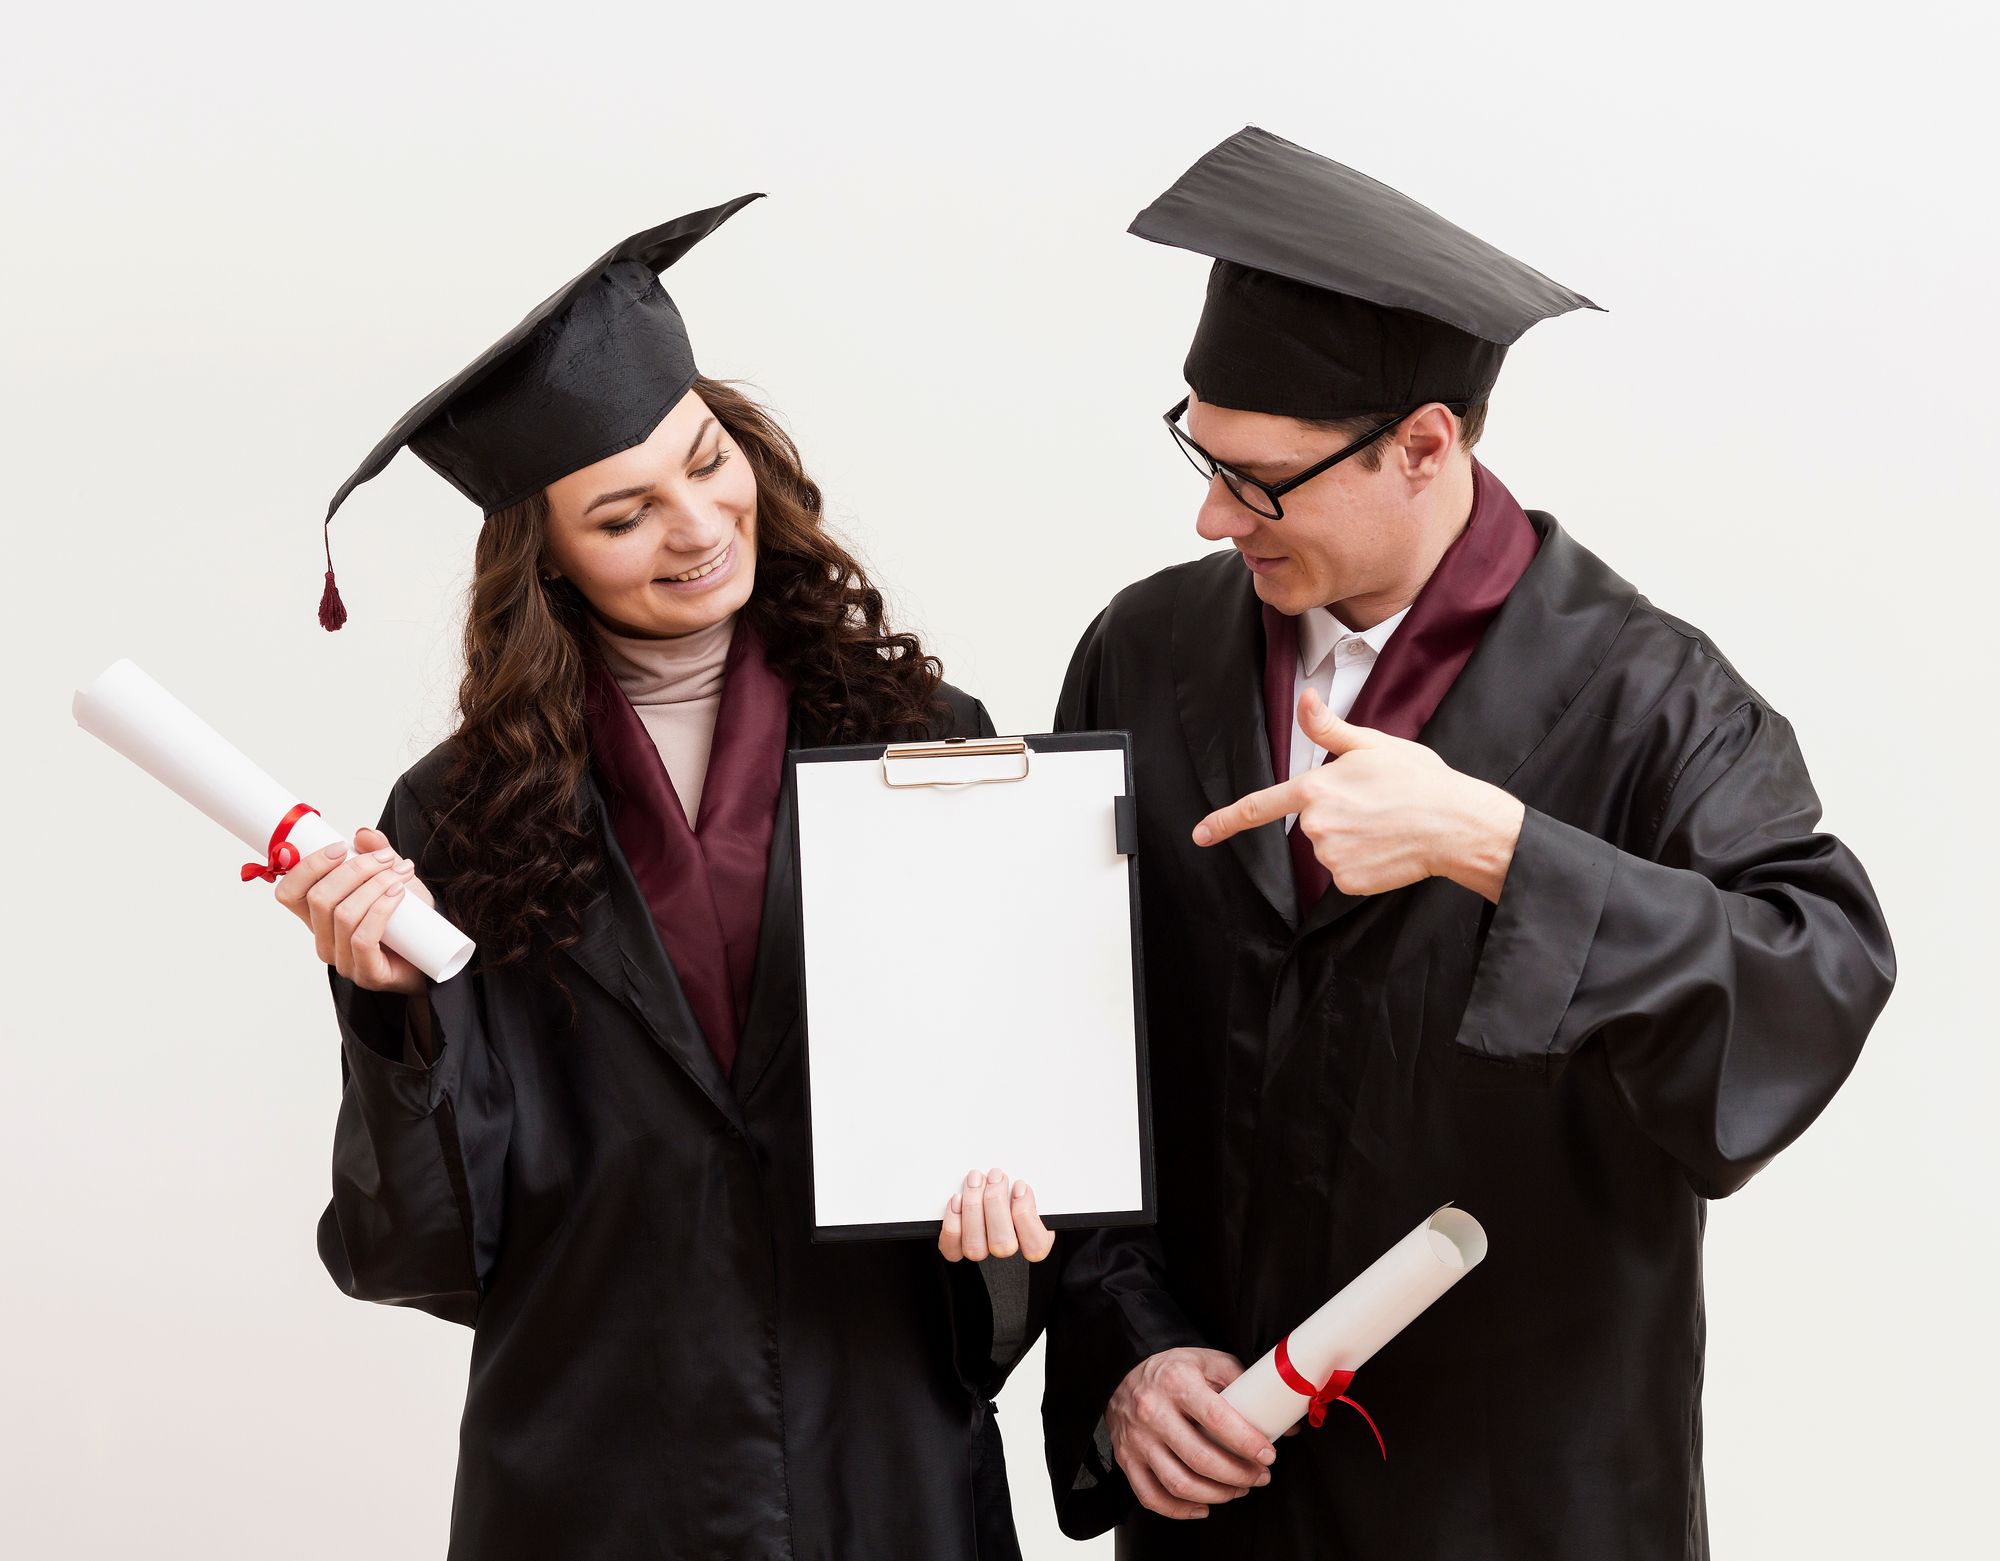 Student Loan Consolidation: Pros and Cons